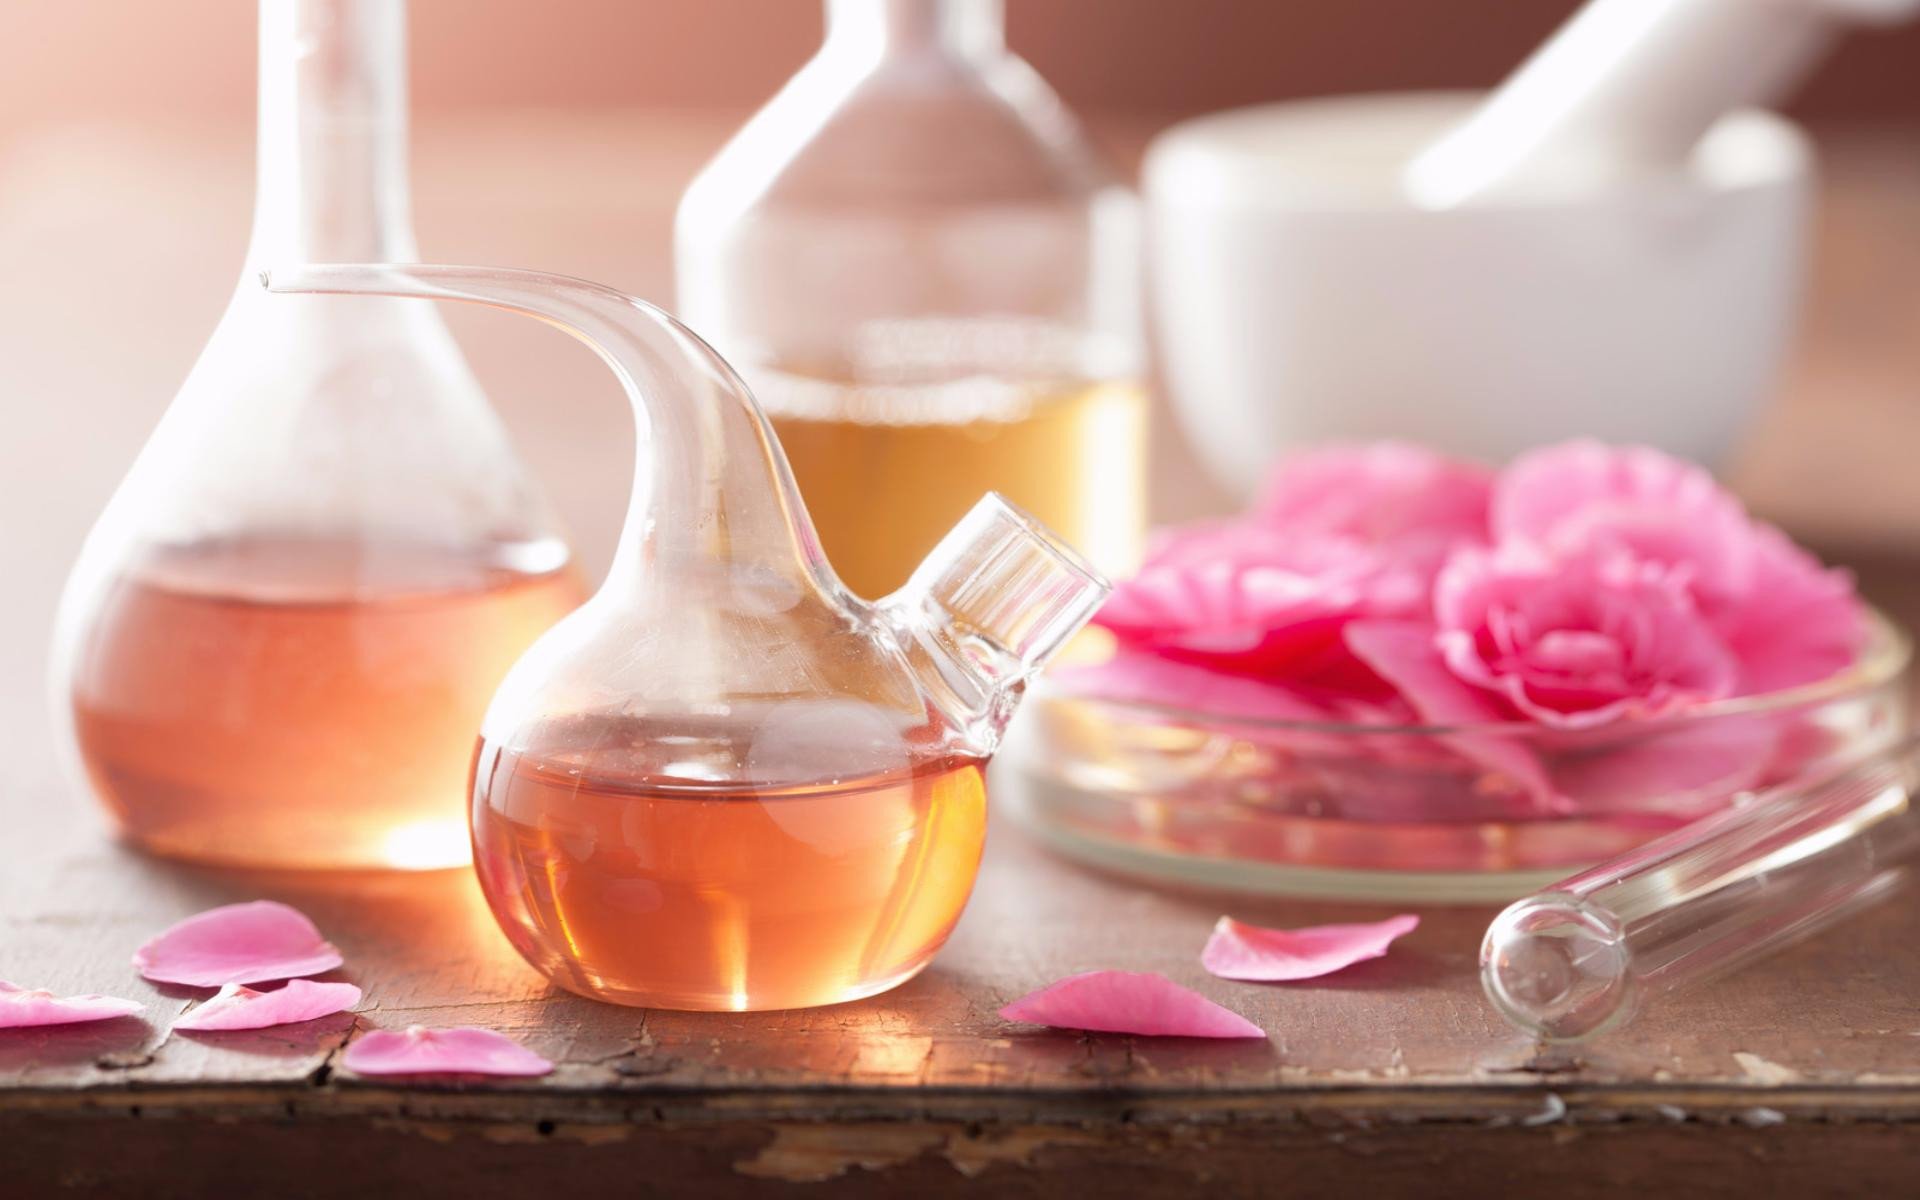 Back in time: A look at Essential Oils and Diffusers